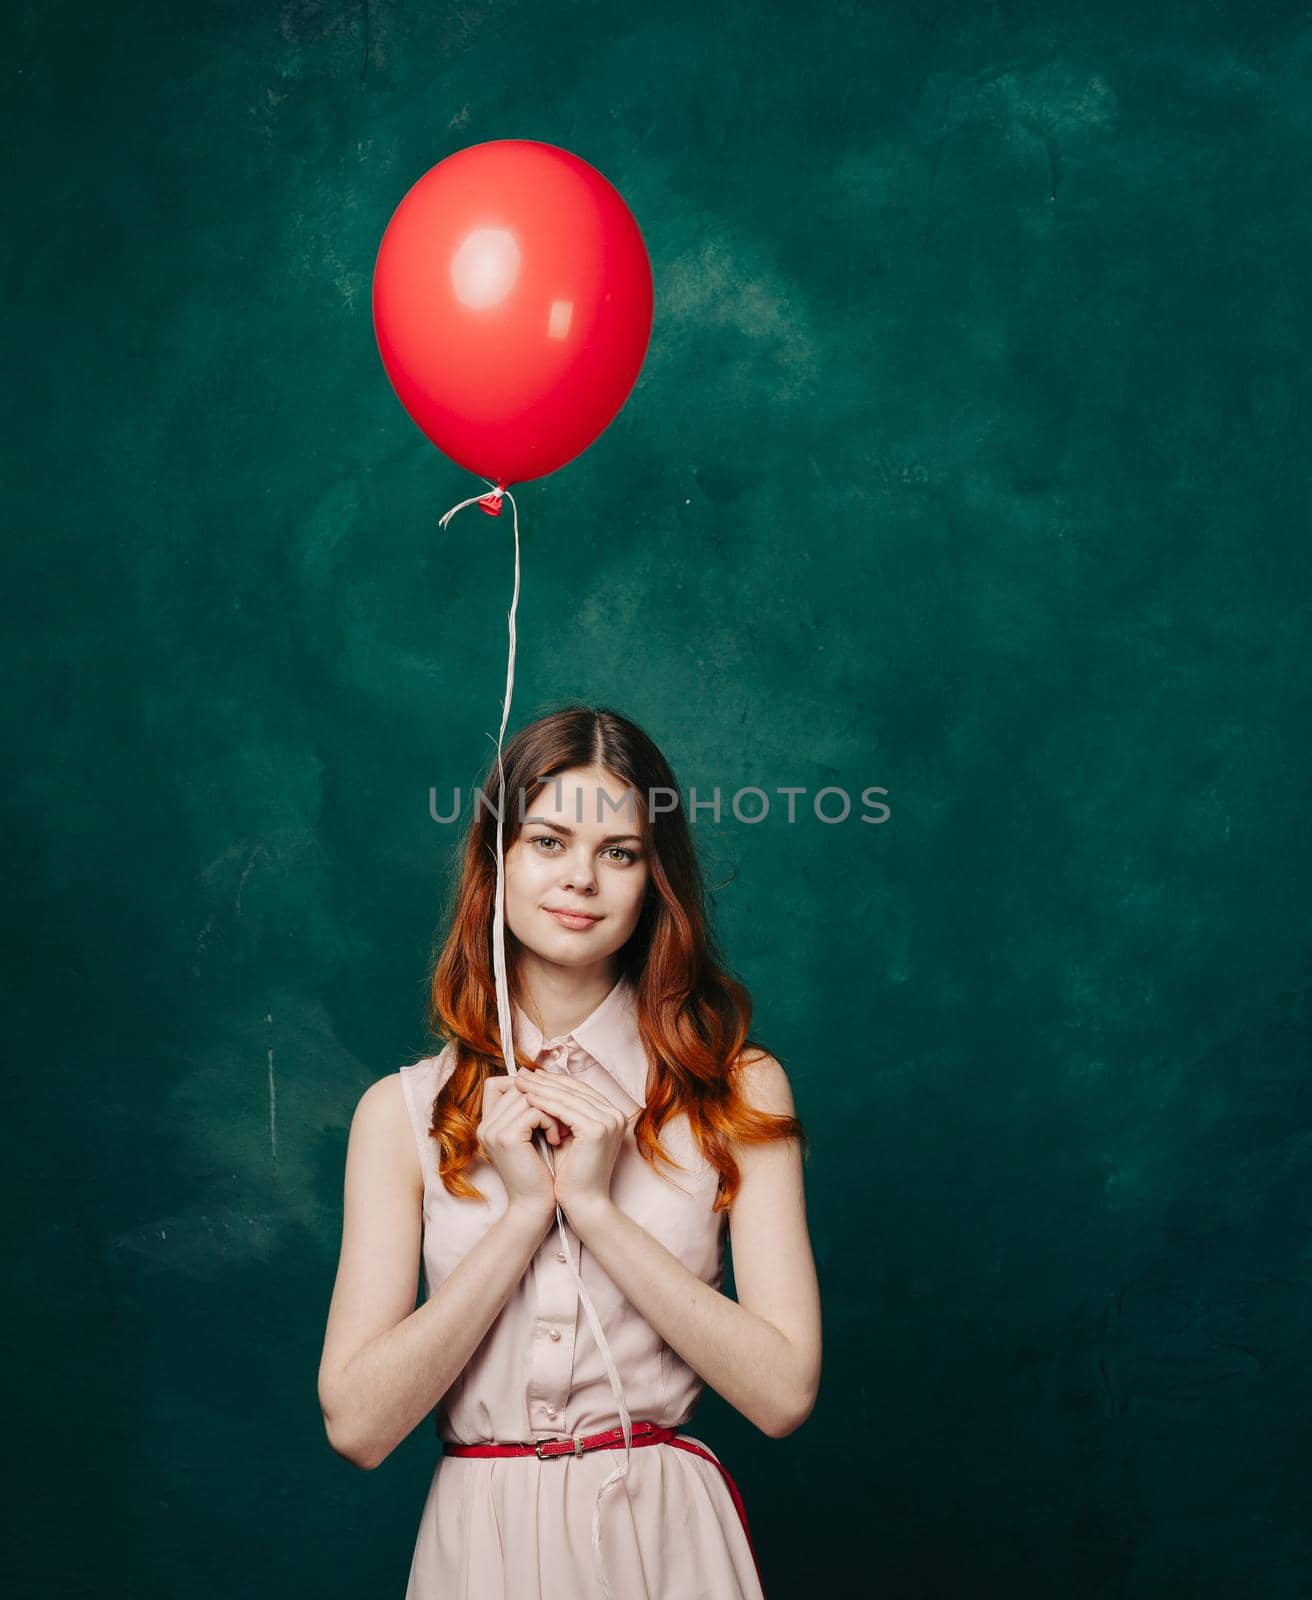 pretty woman in dress red balloon holiday green background. High quality photo